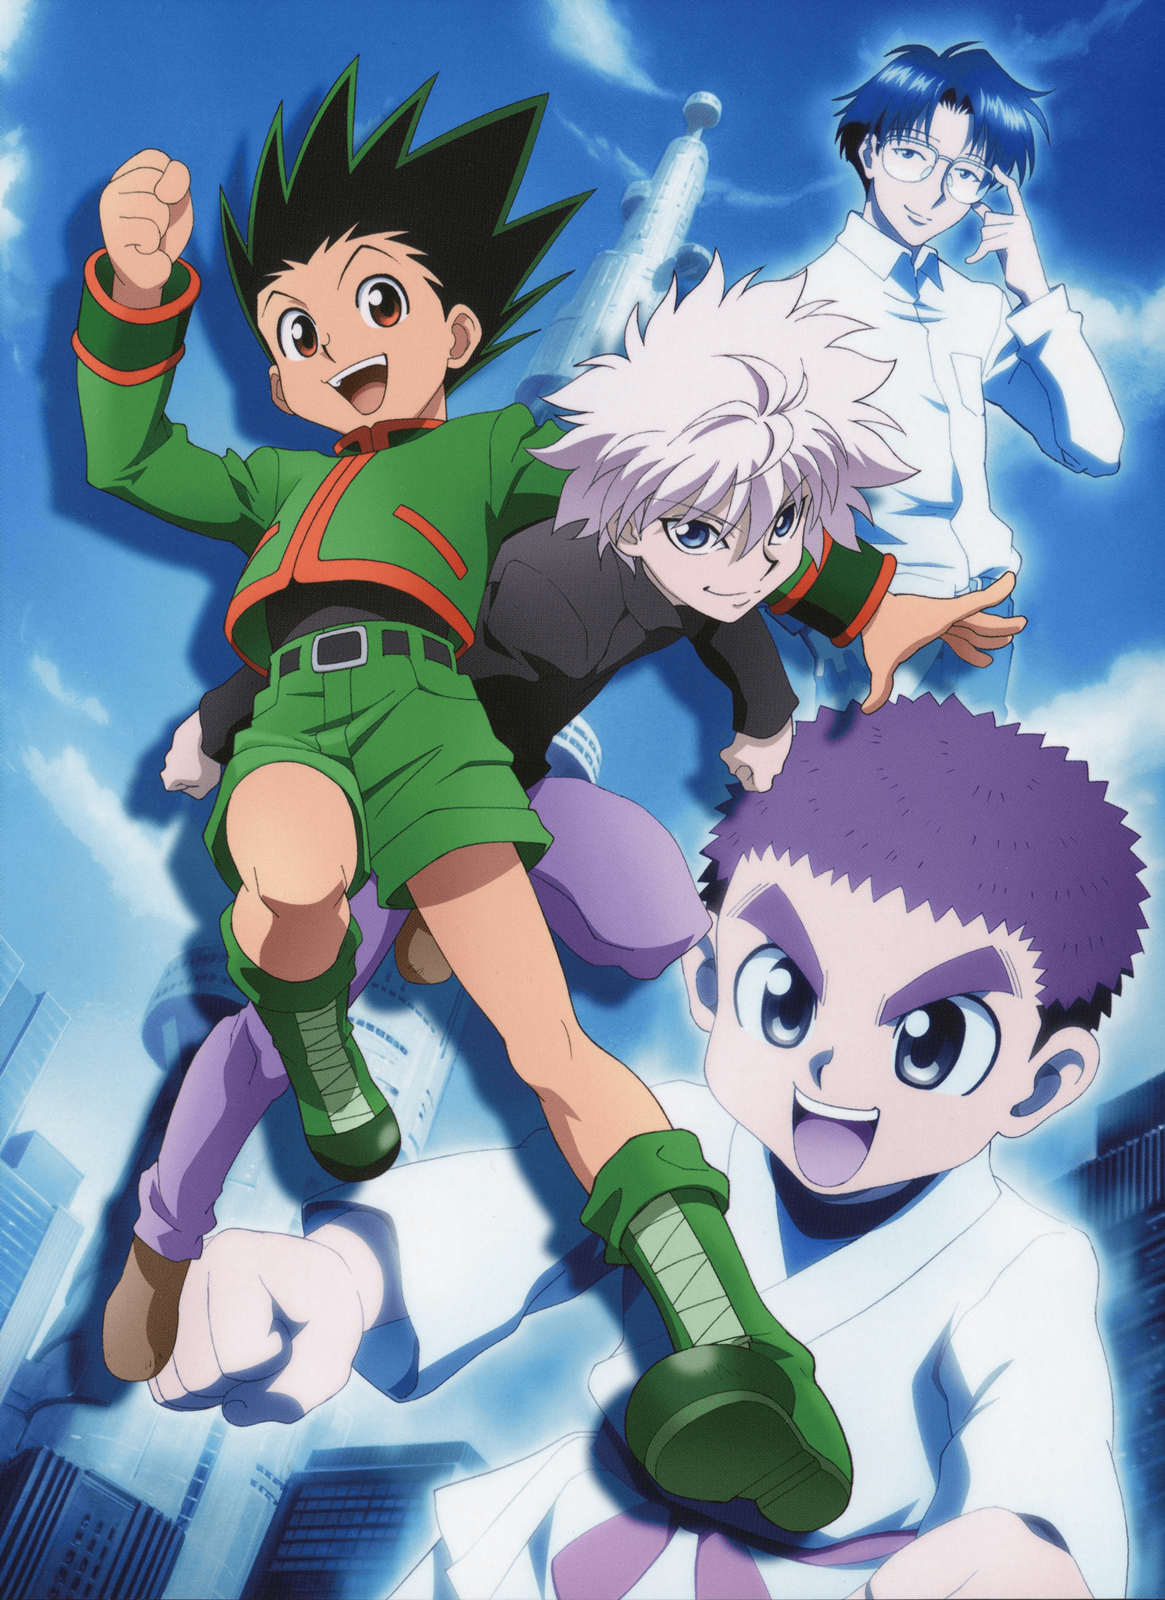 The Characters In Hunter X Hunter Anime Background, Pictures Hunter X Hunter  Background Image And Wallpaper for Free Download